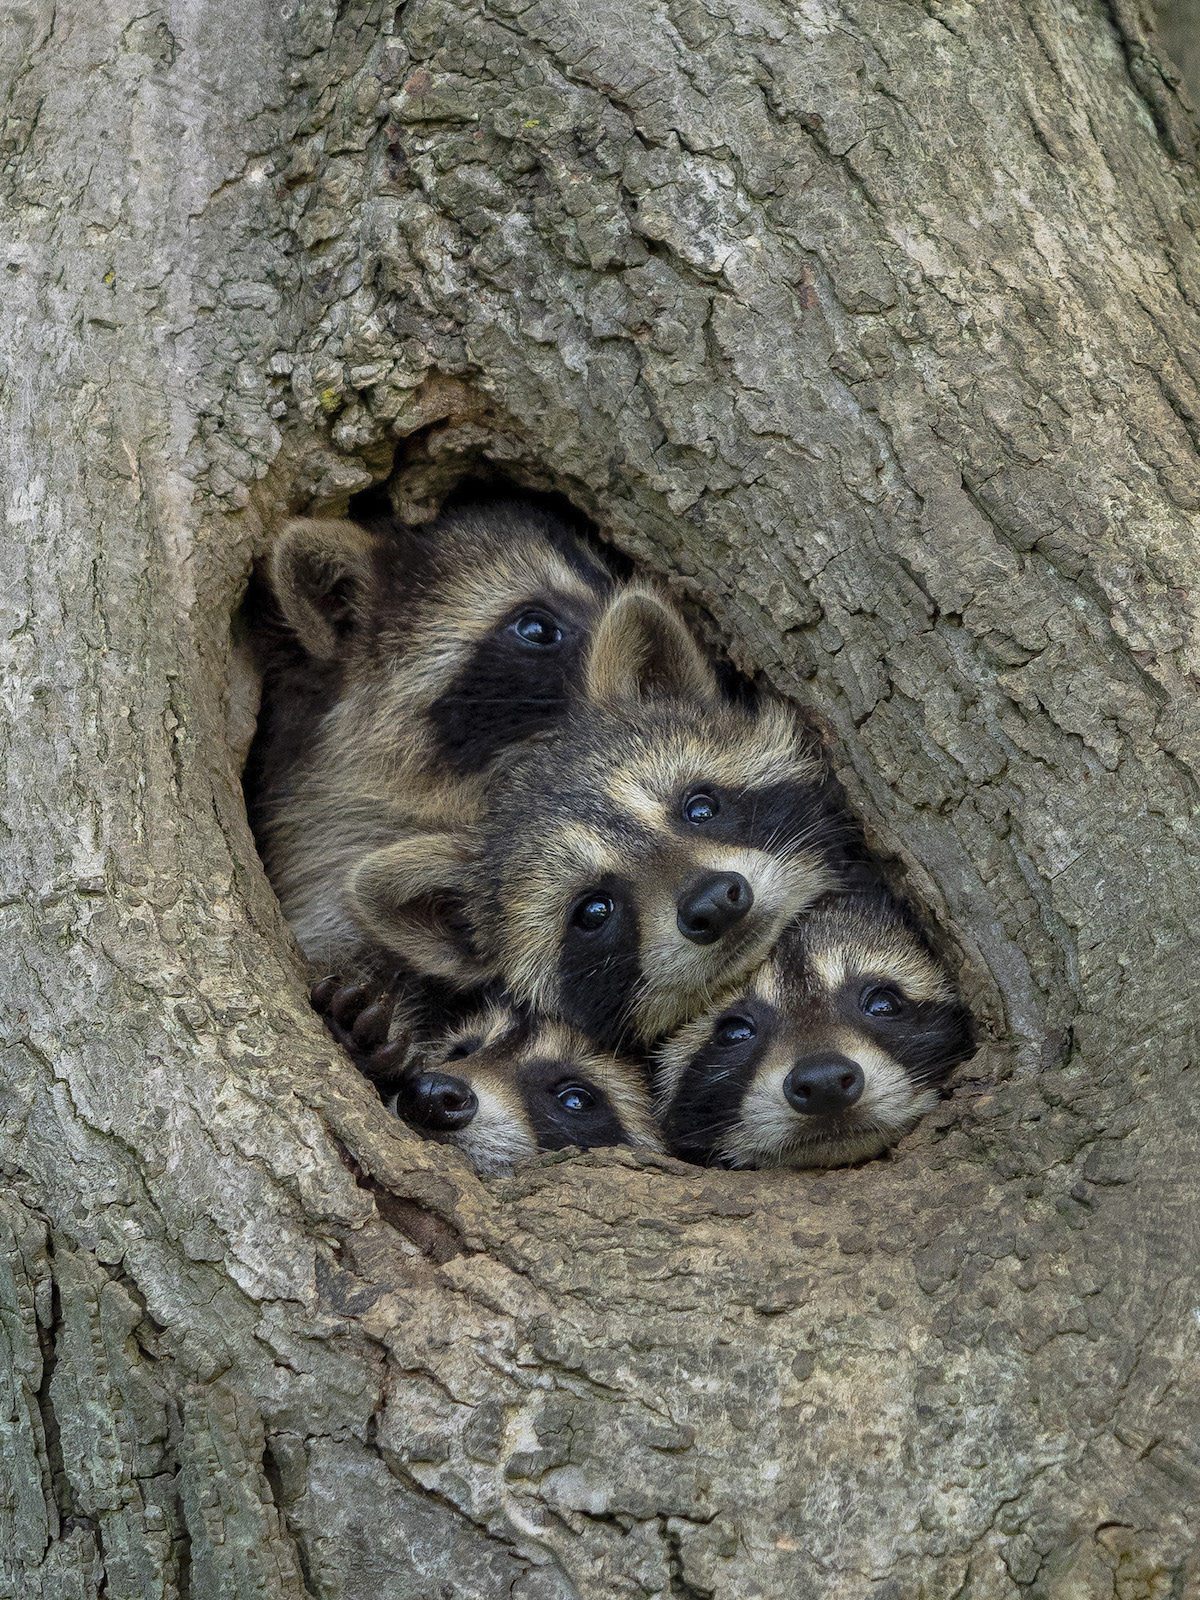 Raccoons / Kevin Biscaburn / Wildlife Comedy Photography Contest